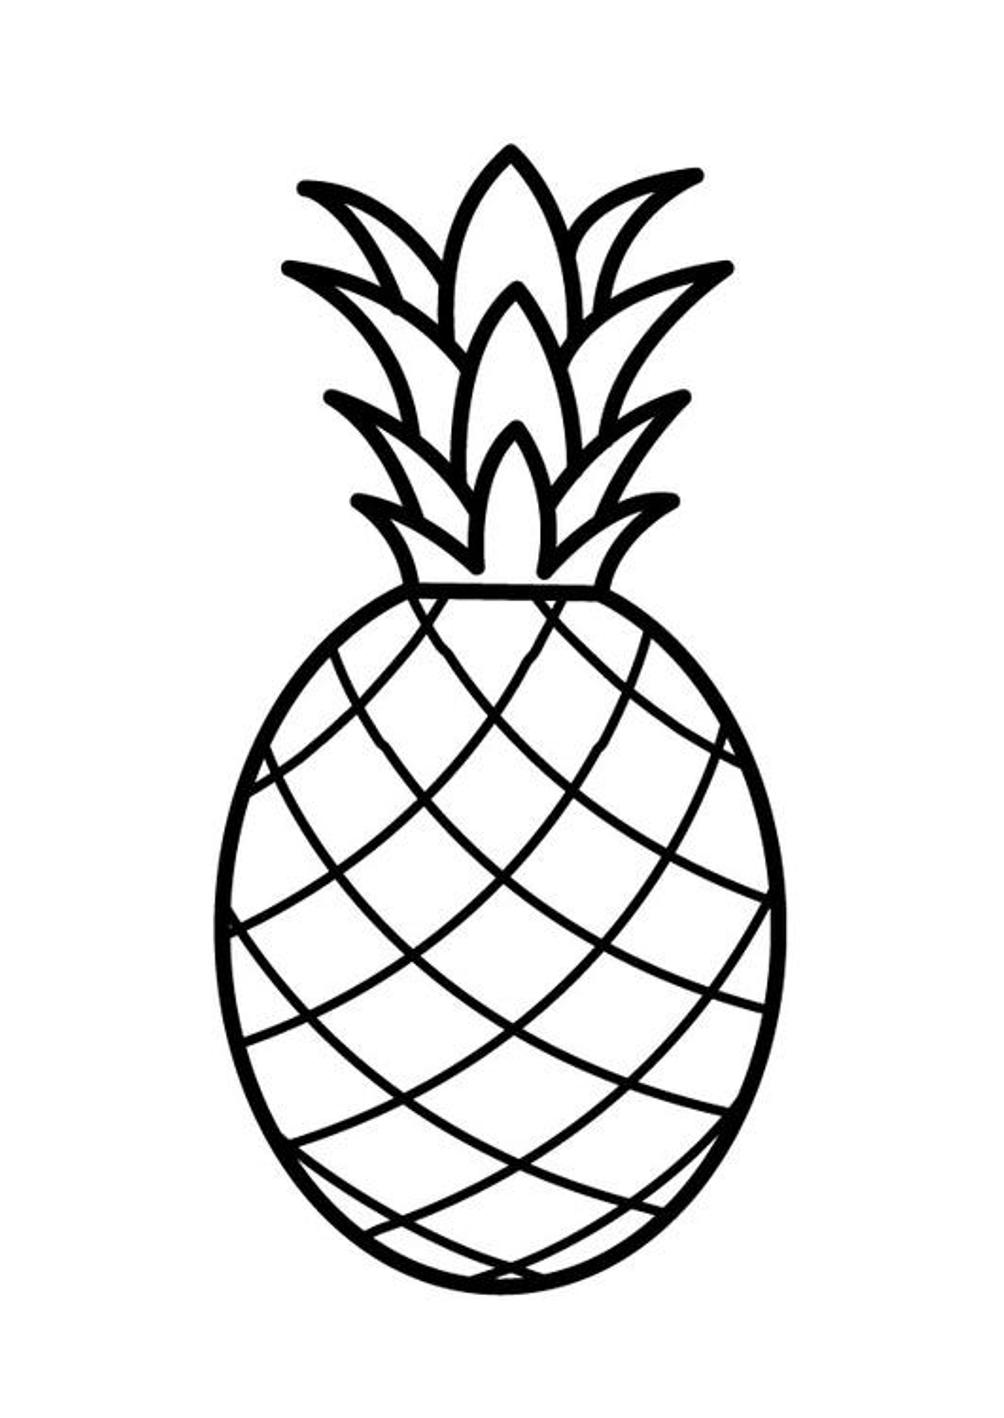 Fruit Pineapple  Free8fdc Coloring Page